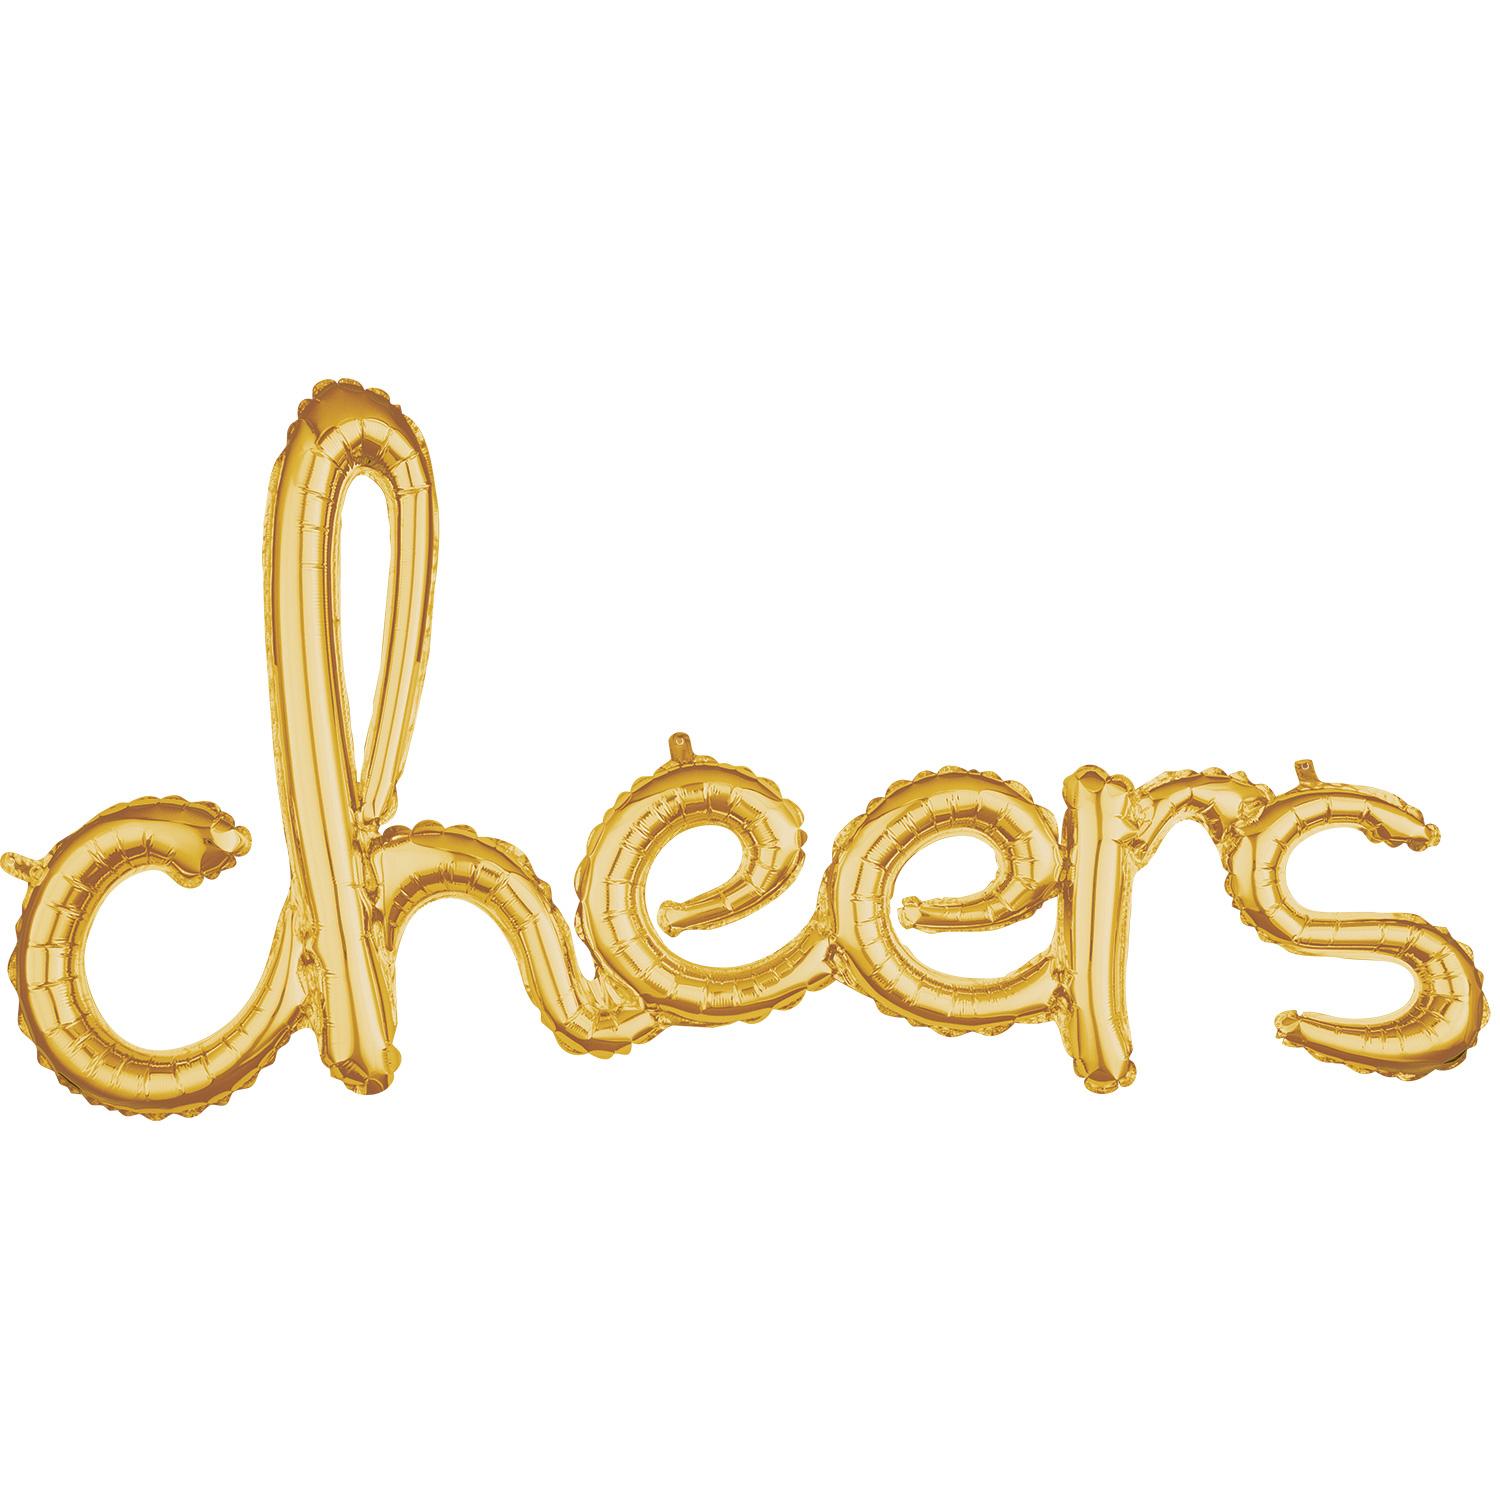 Cheers Script Phrase Gold Foil Balloon 101x53cm Balloons & Streamers - Party Centre - Party Centre